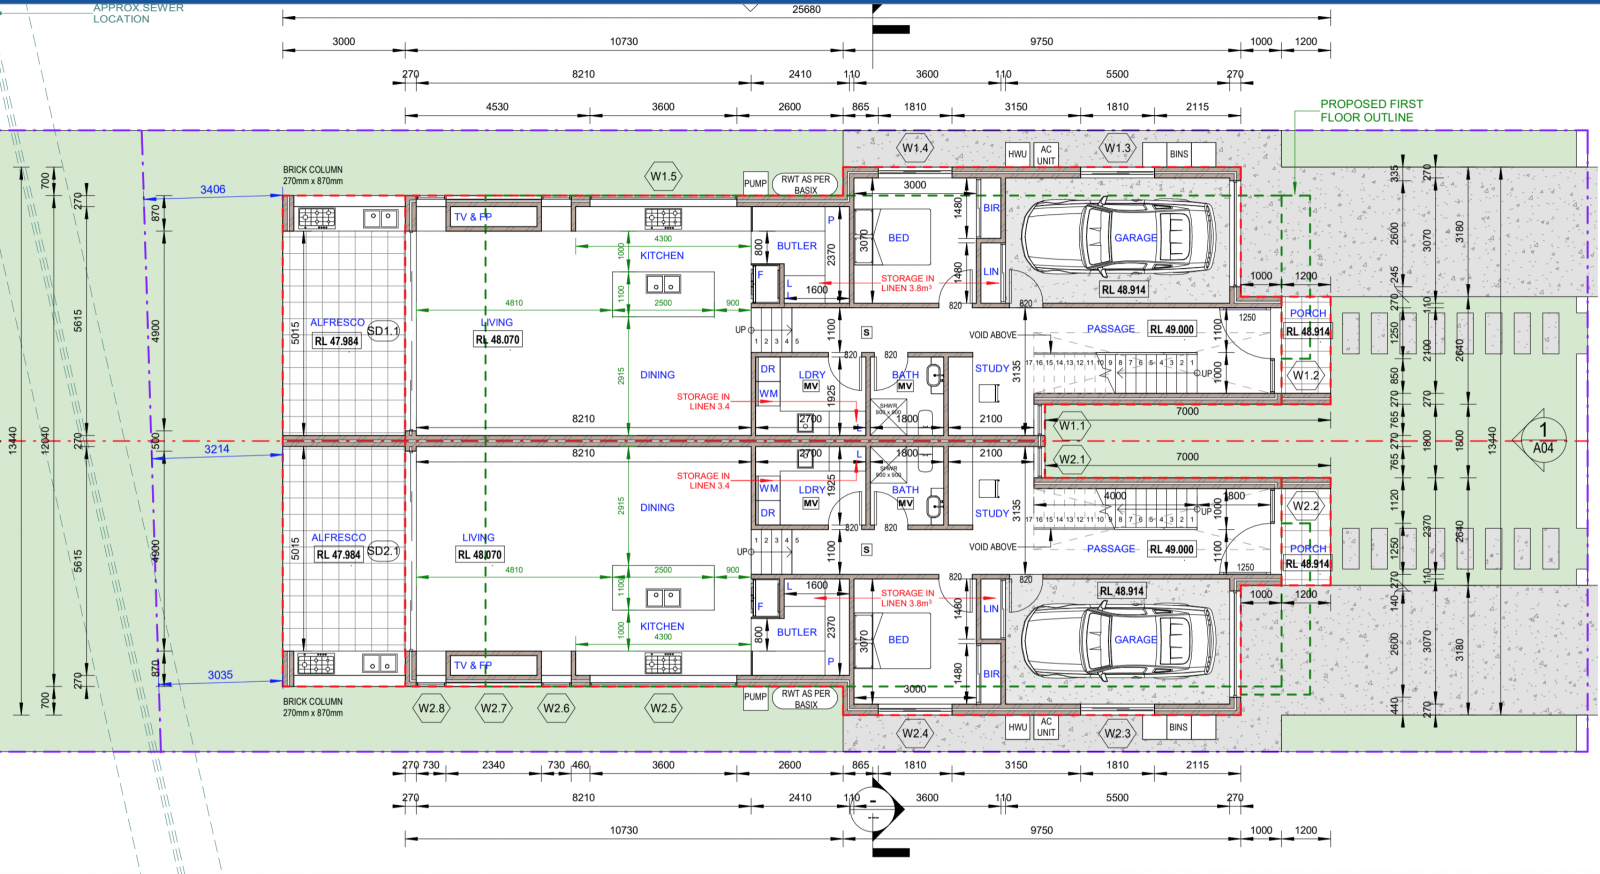 View Photo: Re: Building & Developing A Duplex In North Ryde